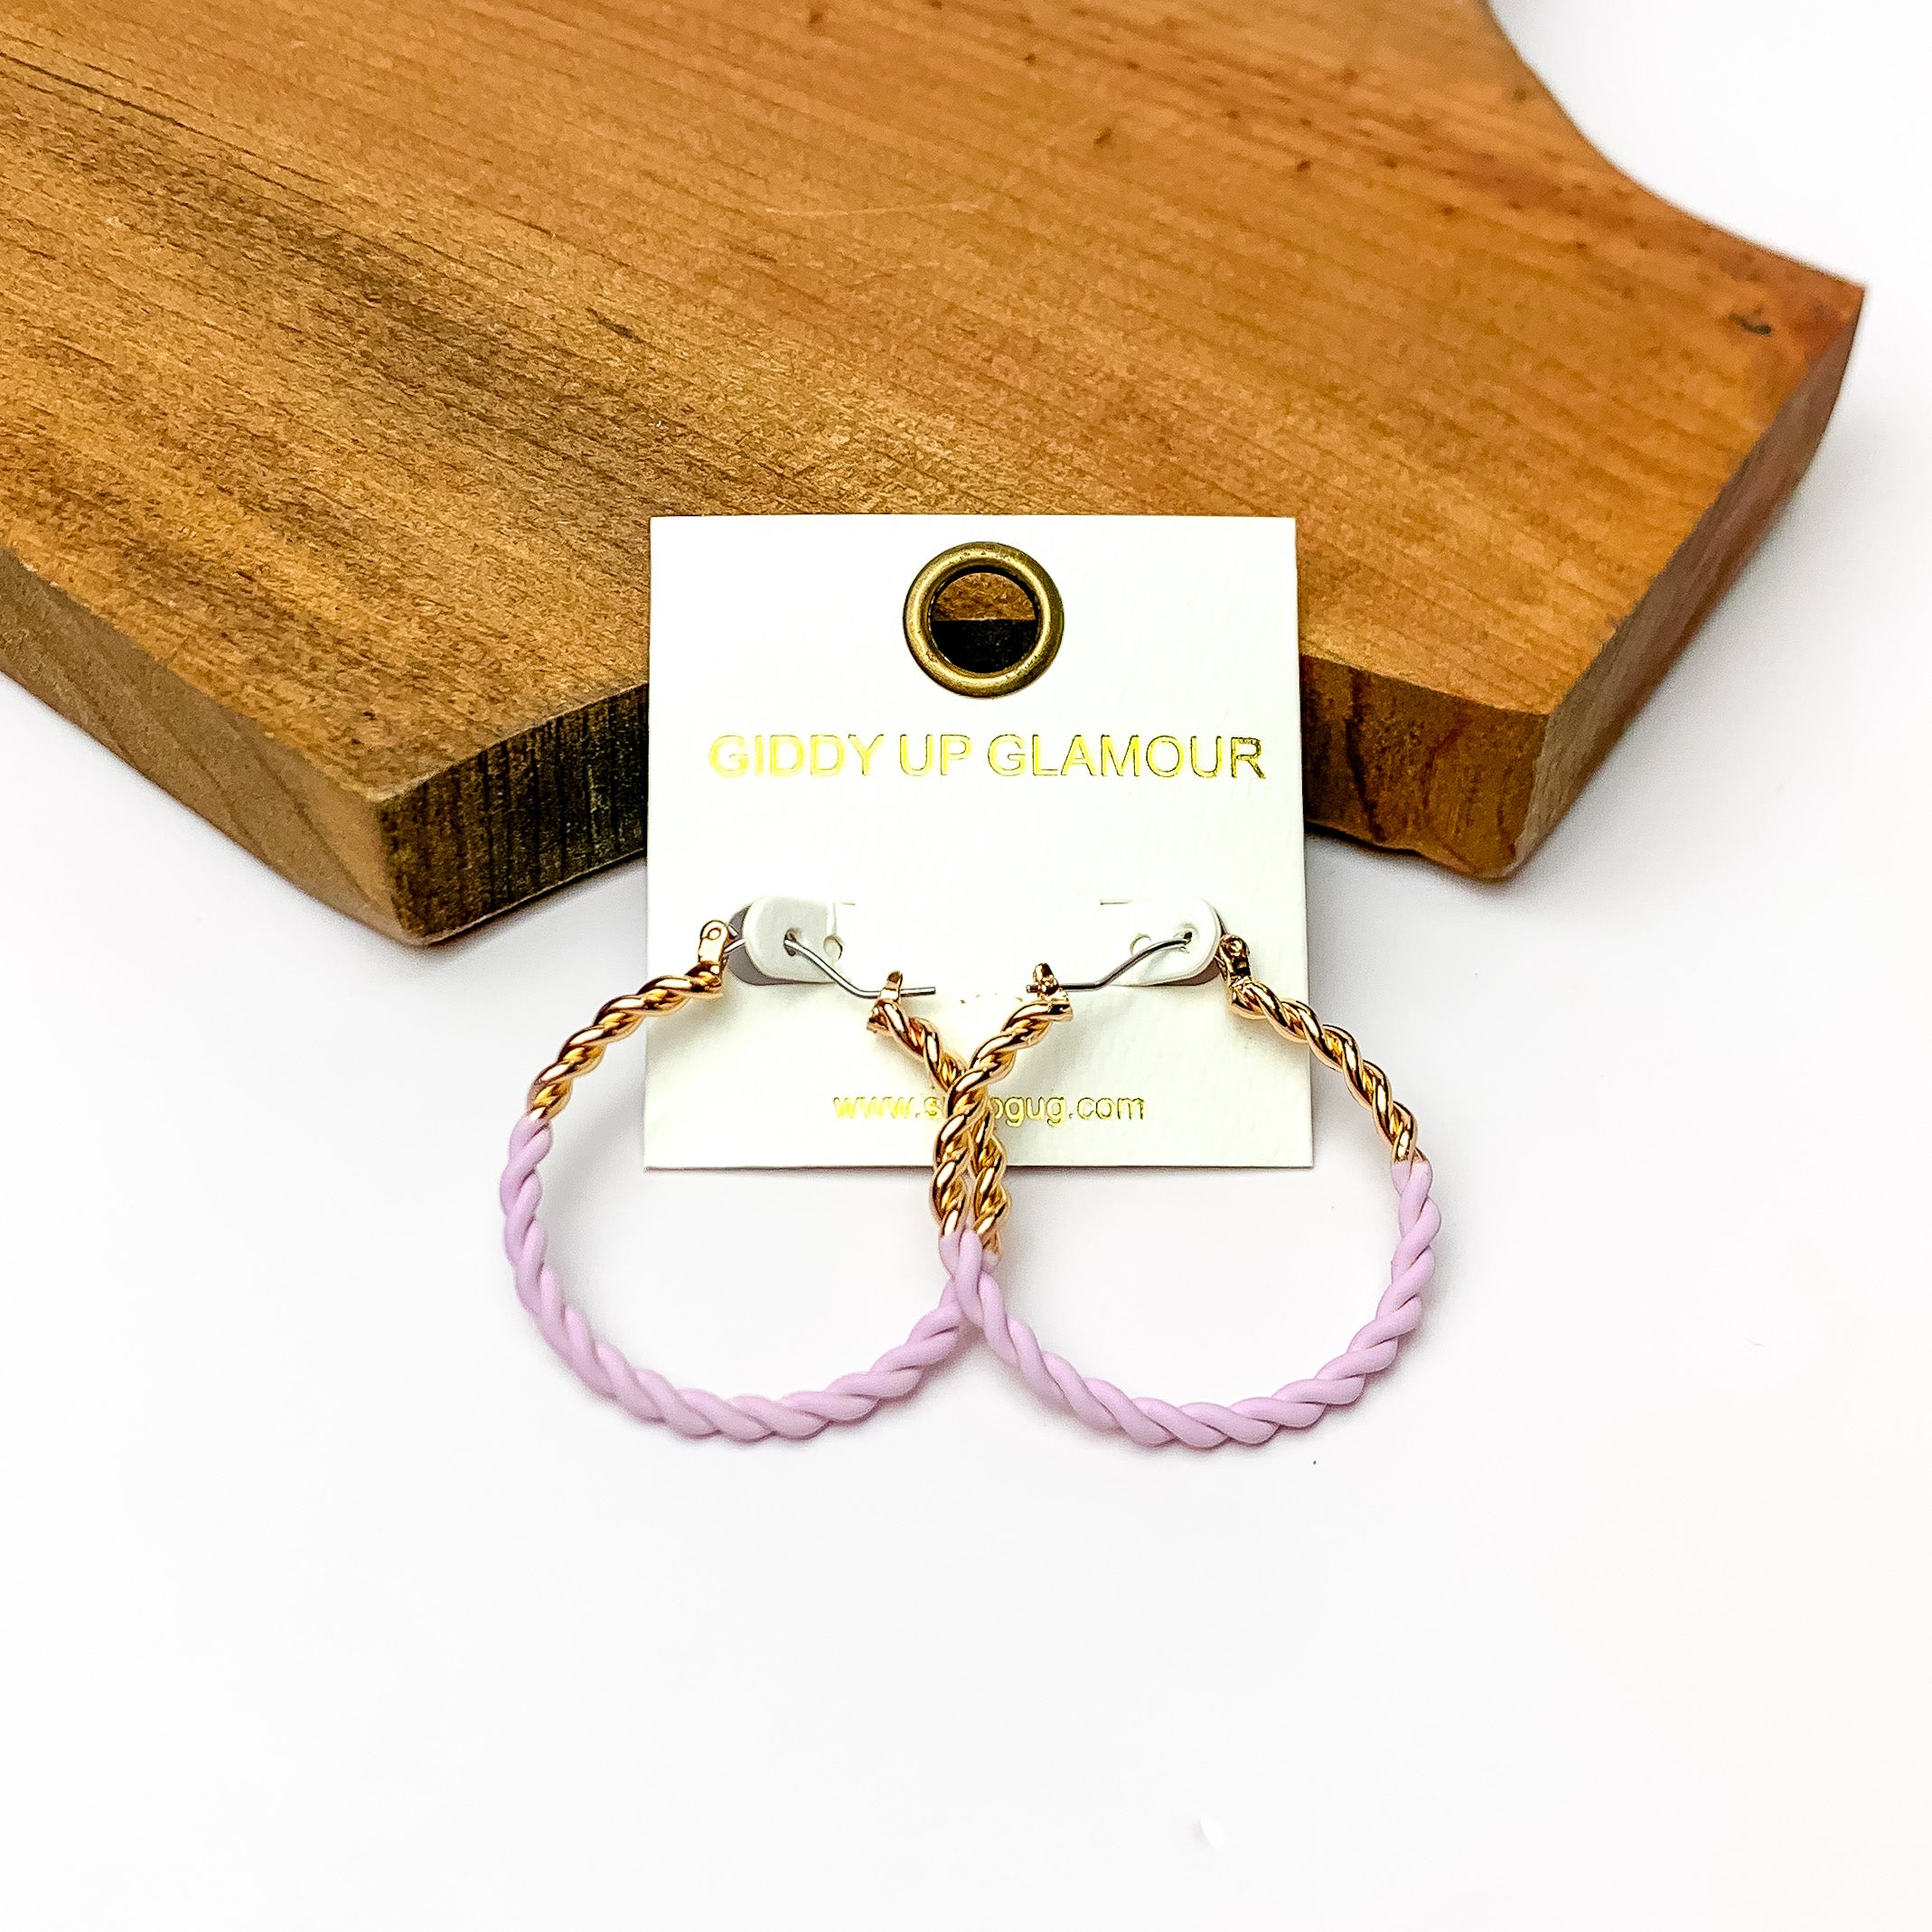 Twisted Gold Tone Hoop Earrings in Lavender. Pictured on a white background with a wood piece behind it.